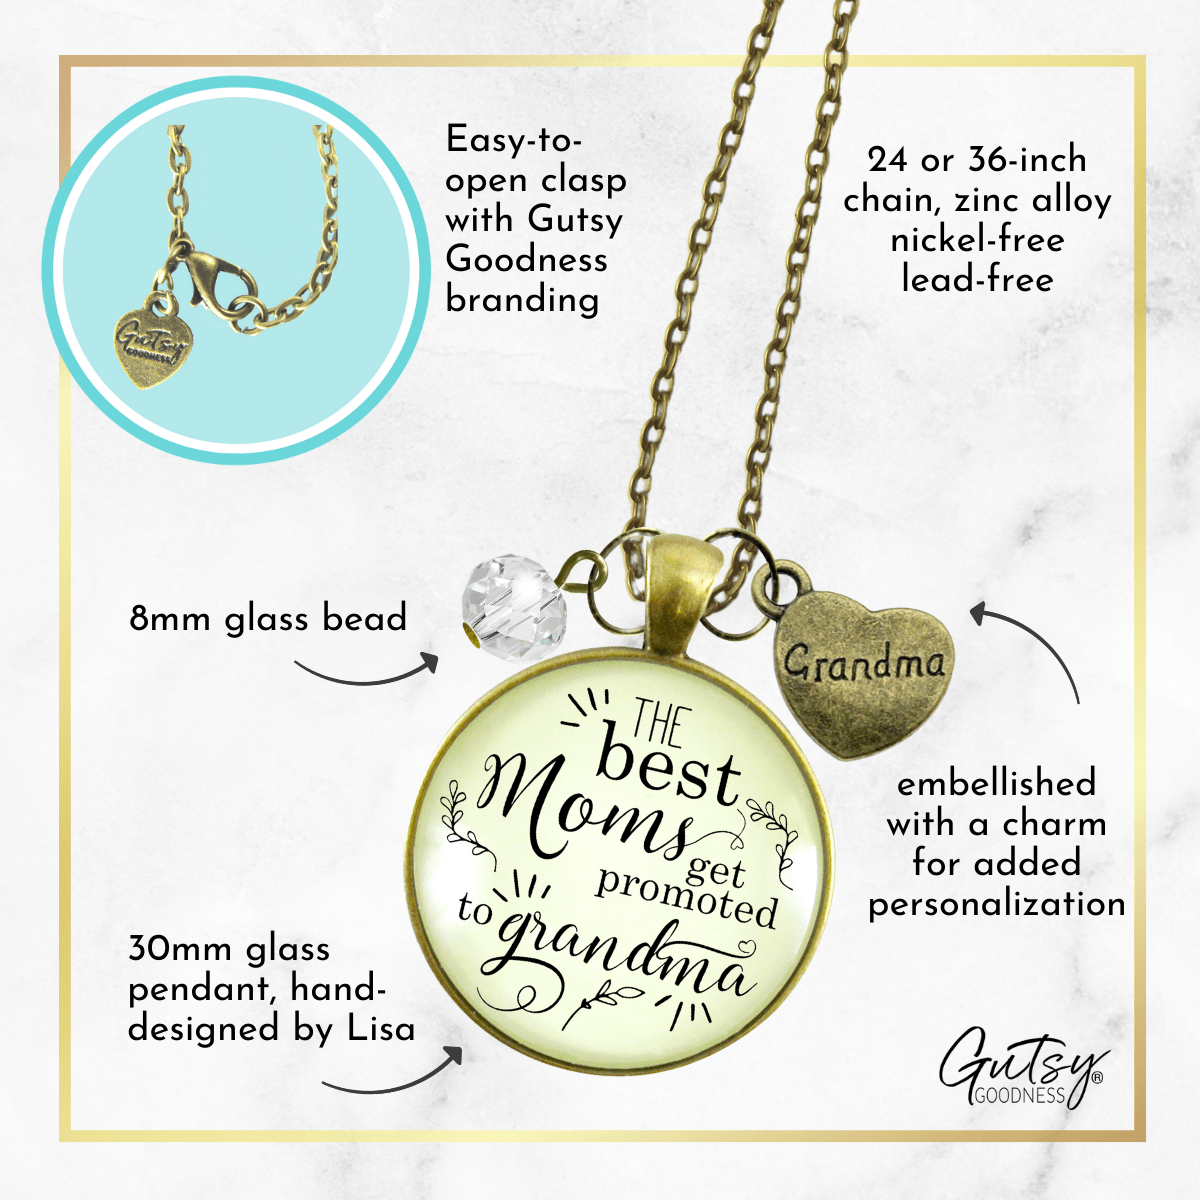 Gutsy Goodness Pregnancy Announcement Grandma Baby Reveal Necklace Best Mom Gift - Gutsy Goodness;Pregnancy Announcement Grandma Baby Reveal Necklace Best Mom Gift - Gutsy Goodness Handmade Jewelry Gifts